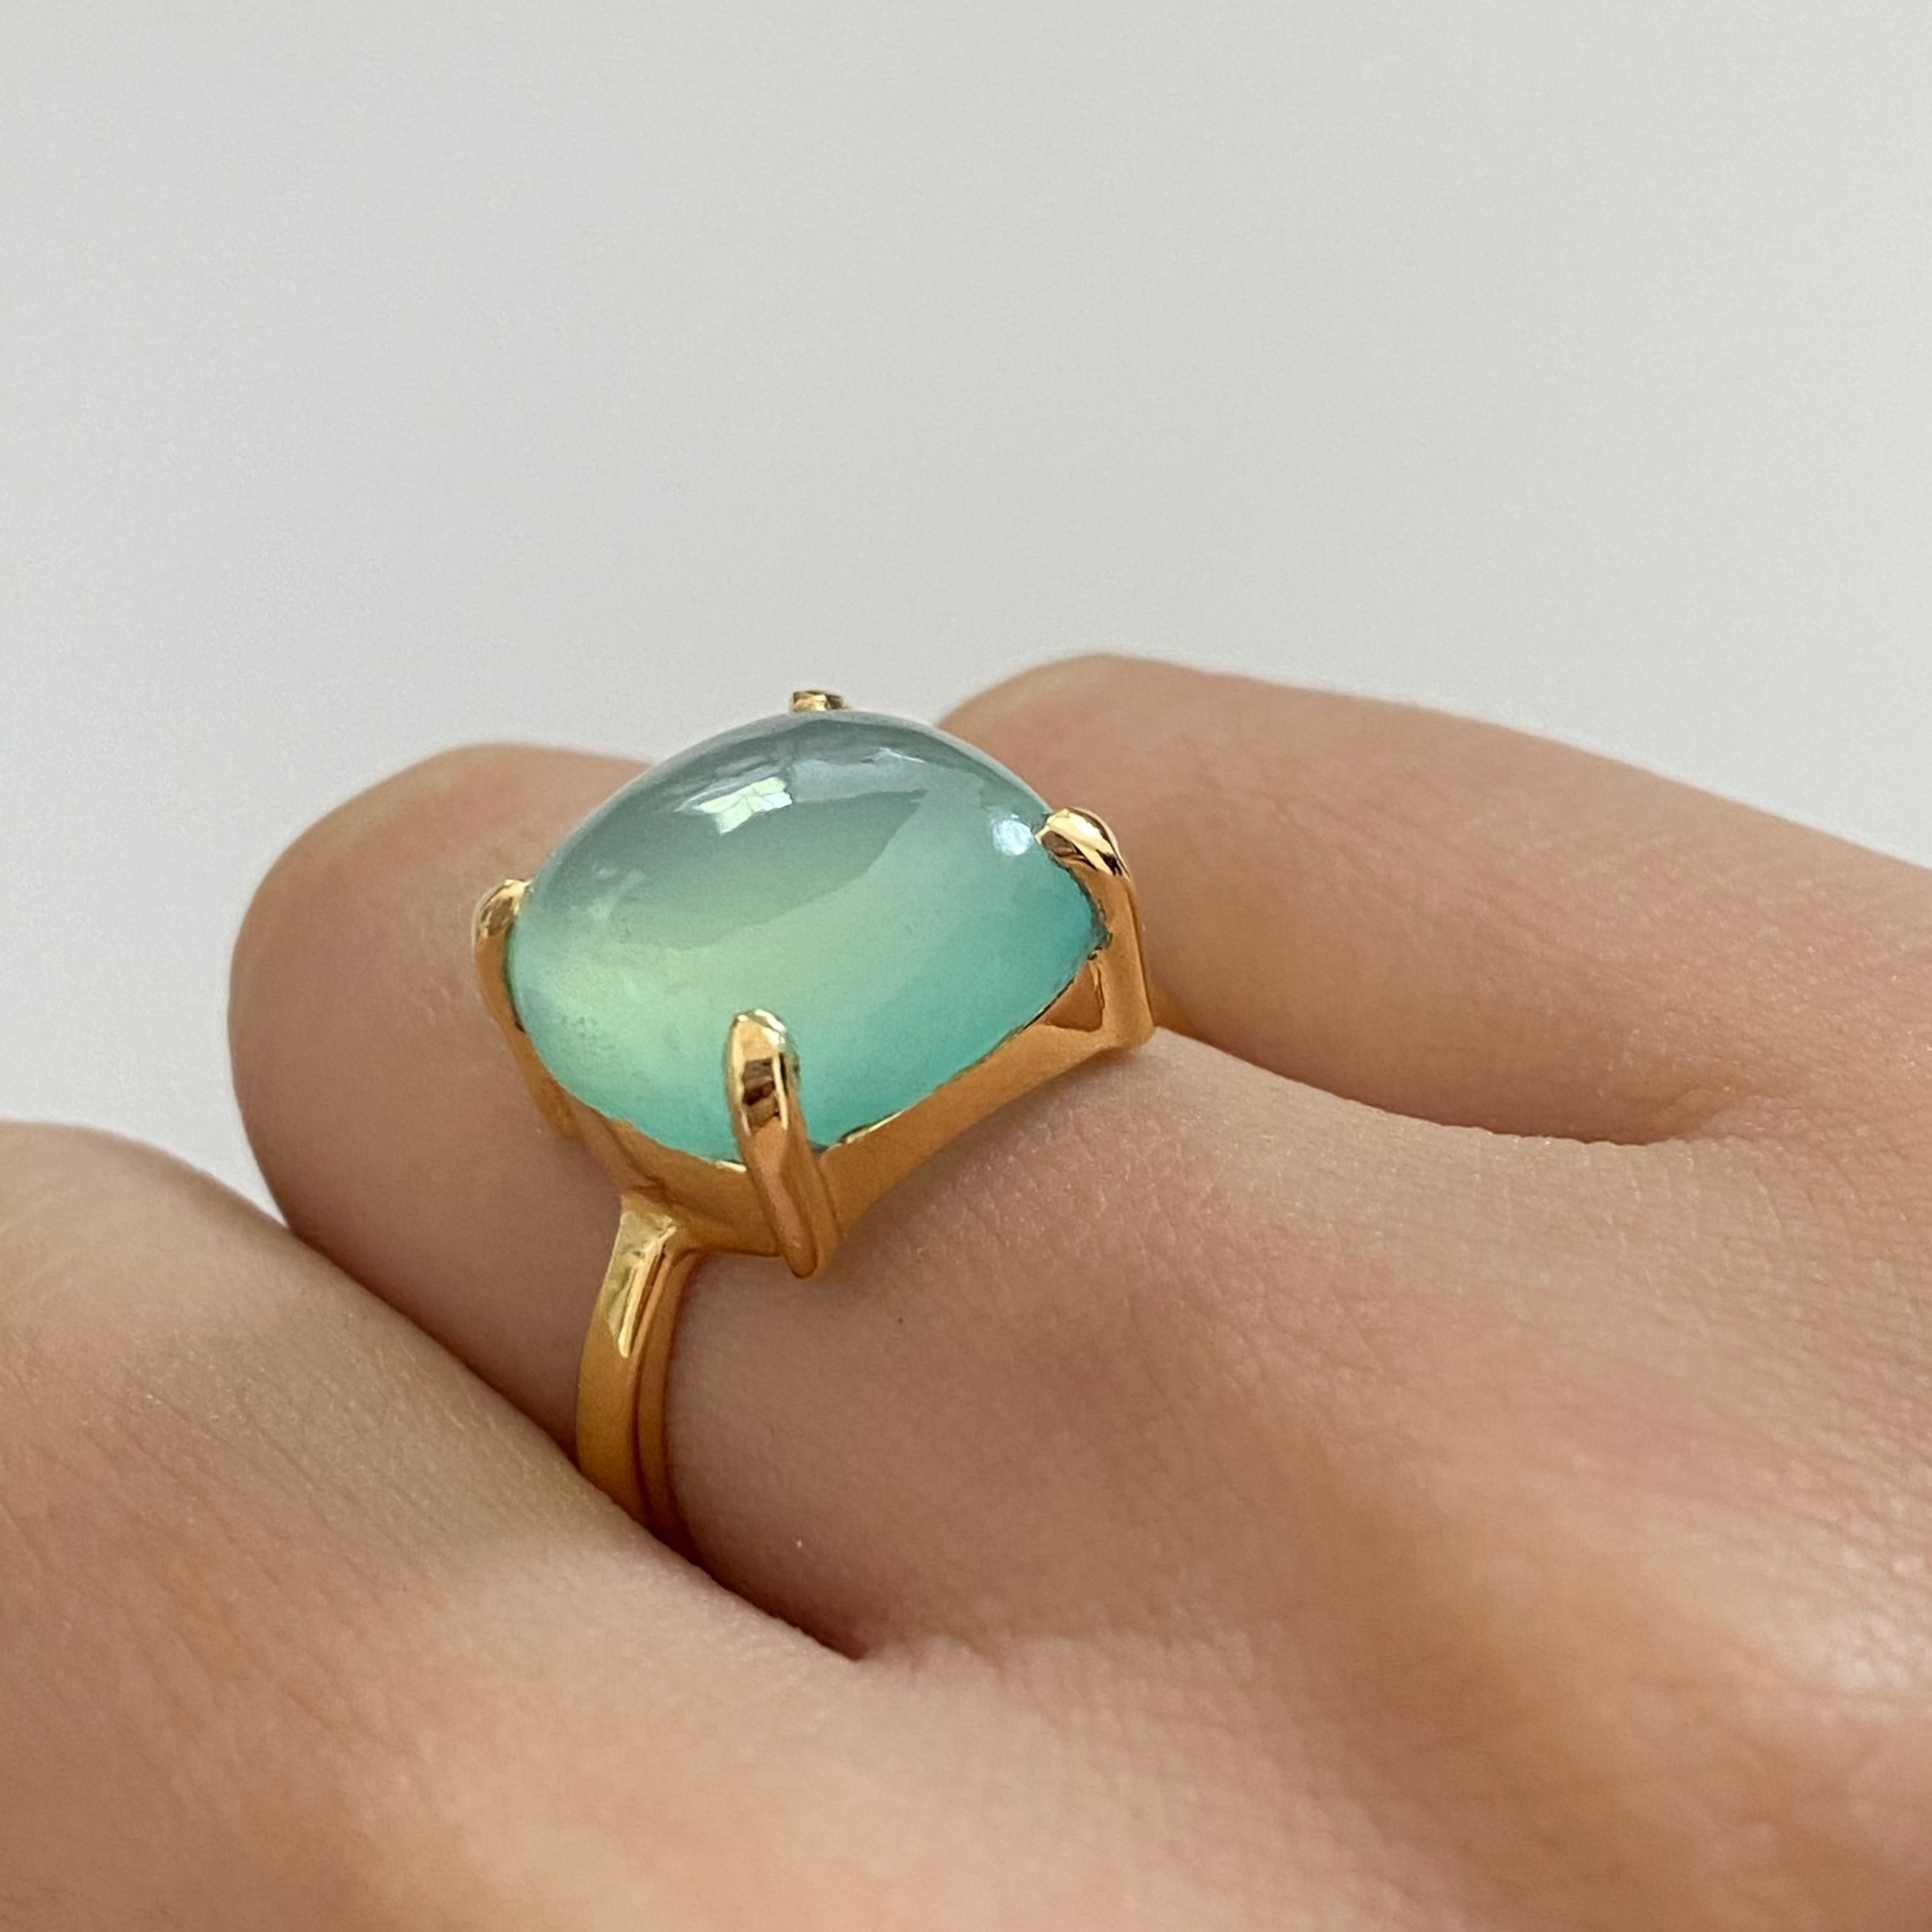 Square Cabochon Aqua Chalcedony Ring in Gold Plated Sterling Silver